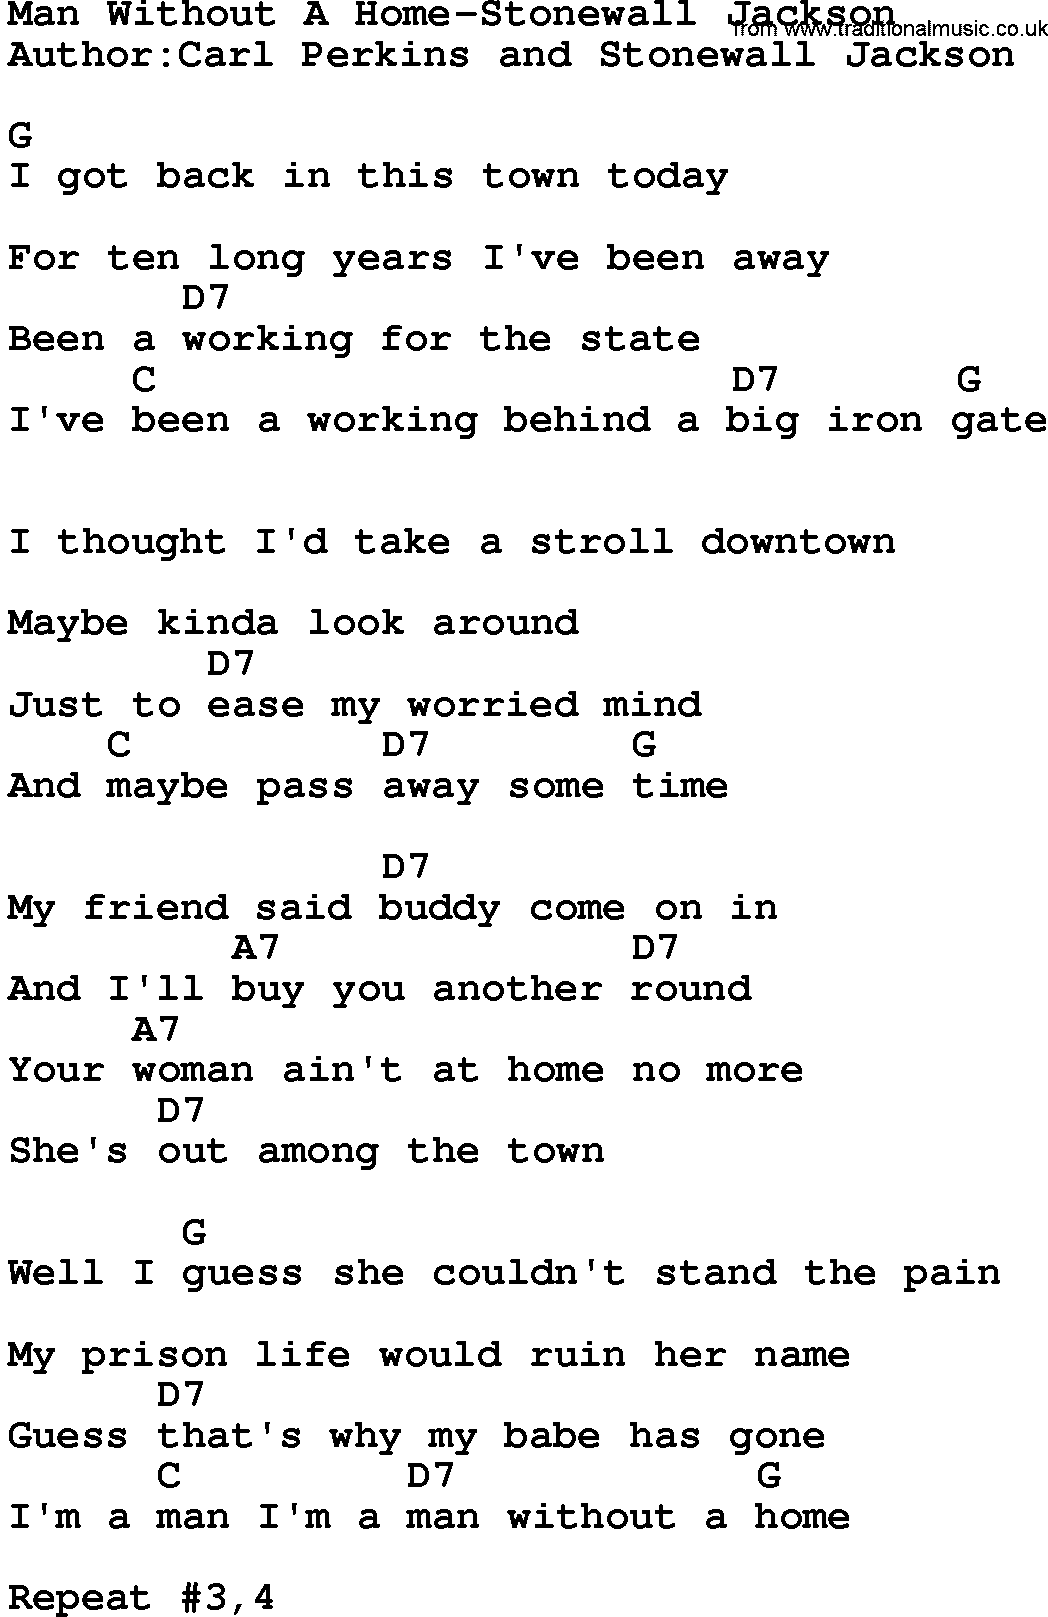 Country music song: Man Without A Home-Stonewall Jackson lyrics and chords